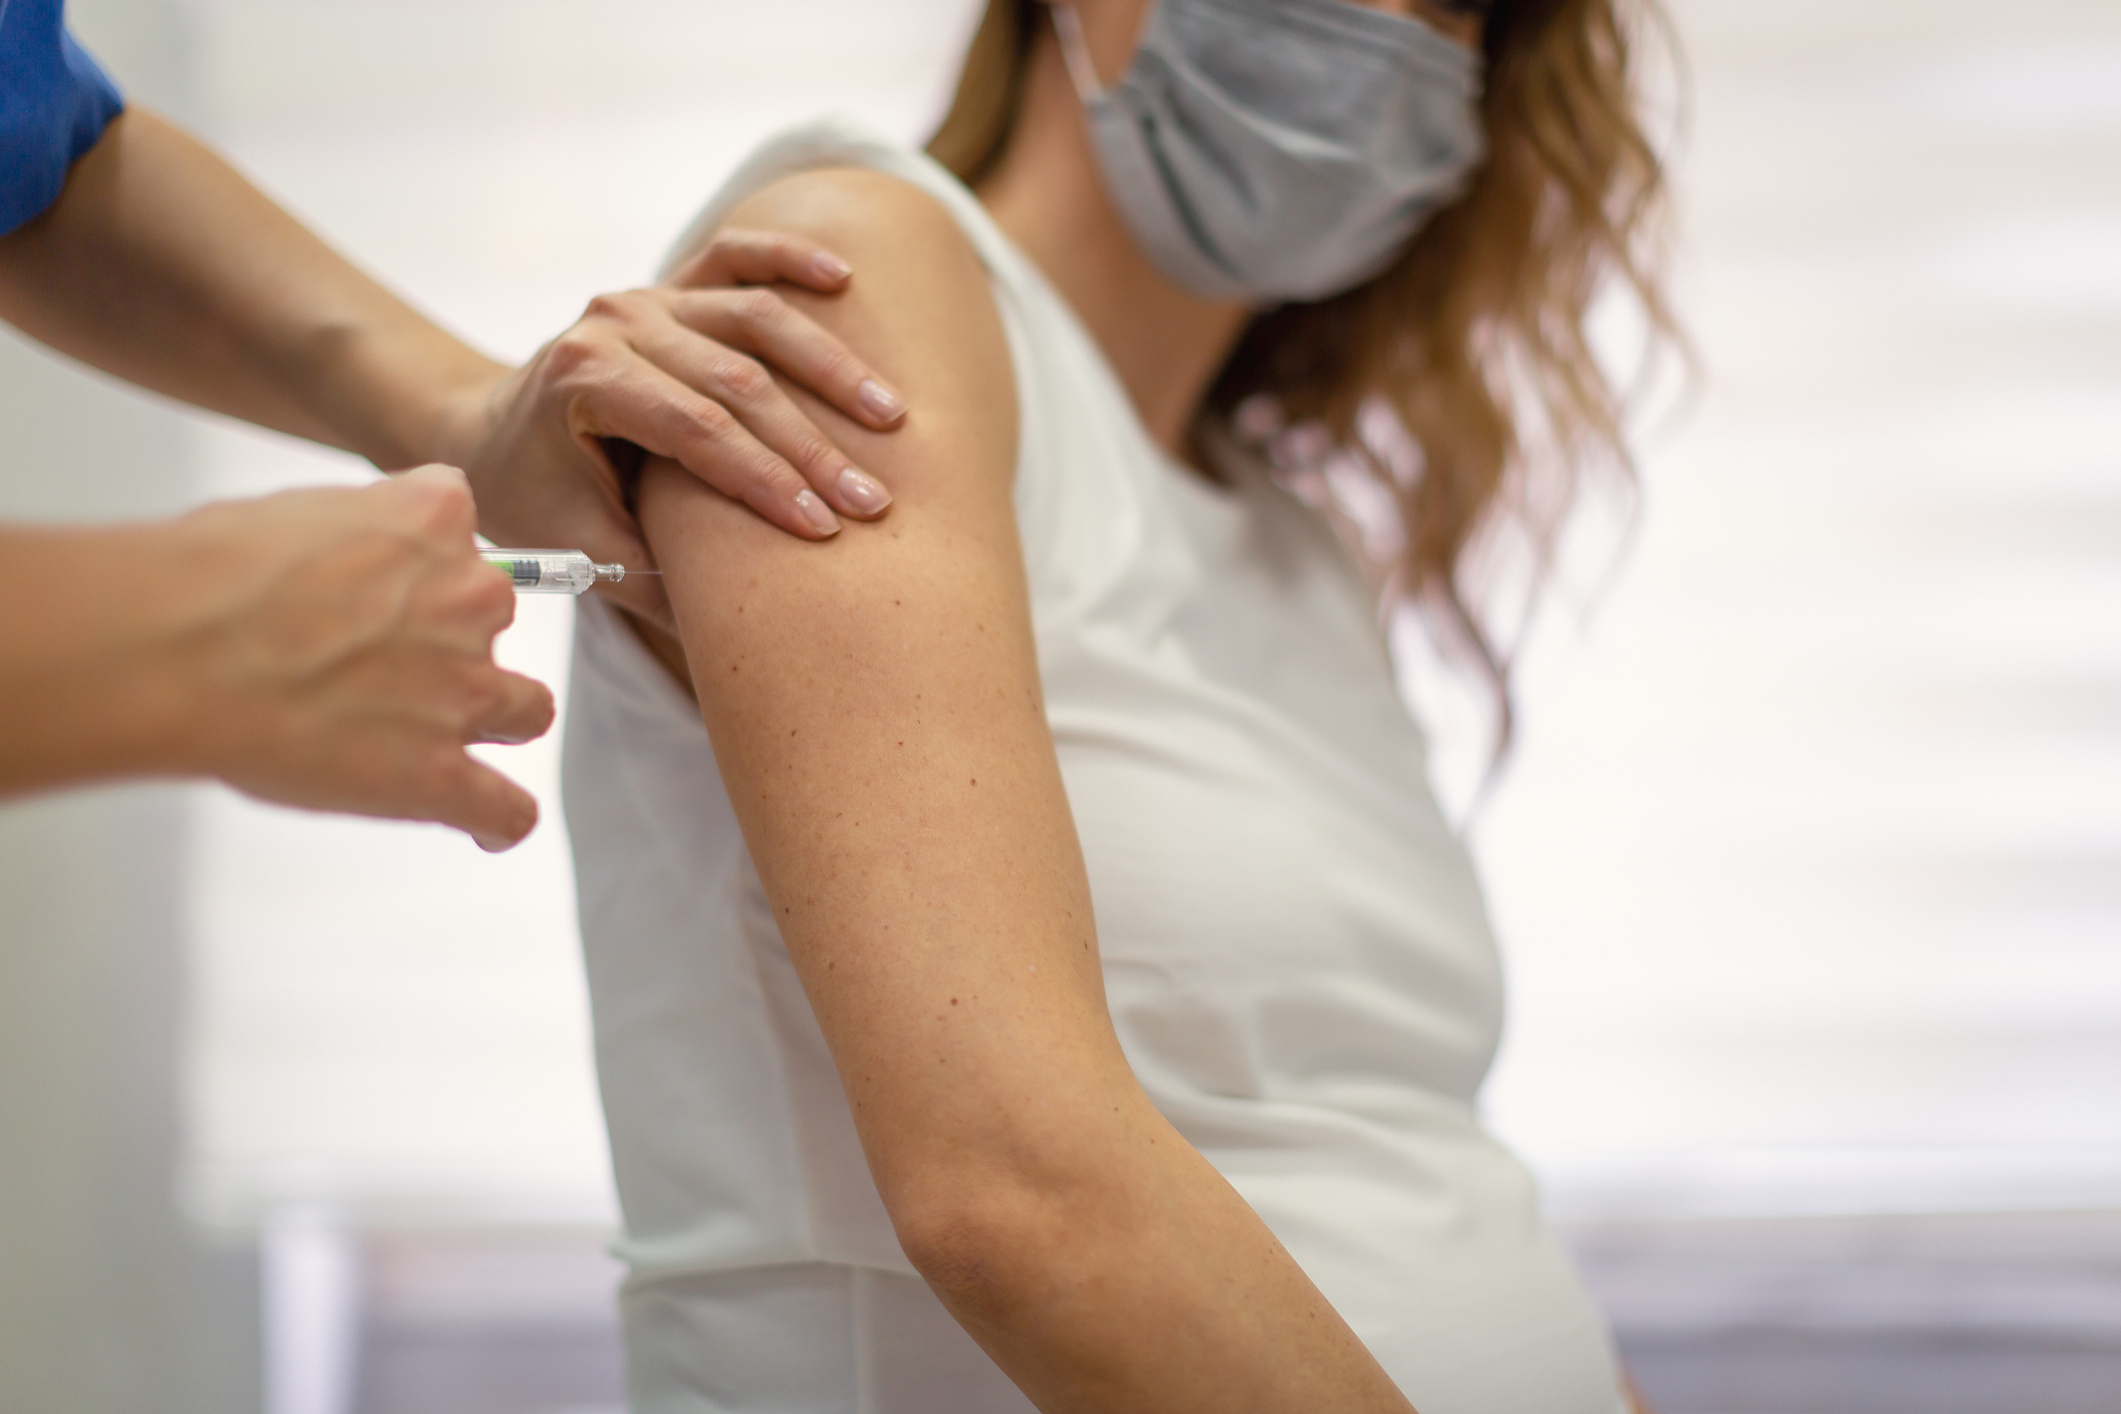 PHOTO: A COVID-19 vaccine is being administered to a woman by a medical professional in this stock image.